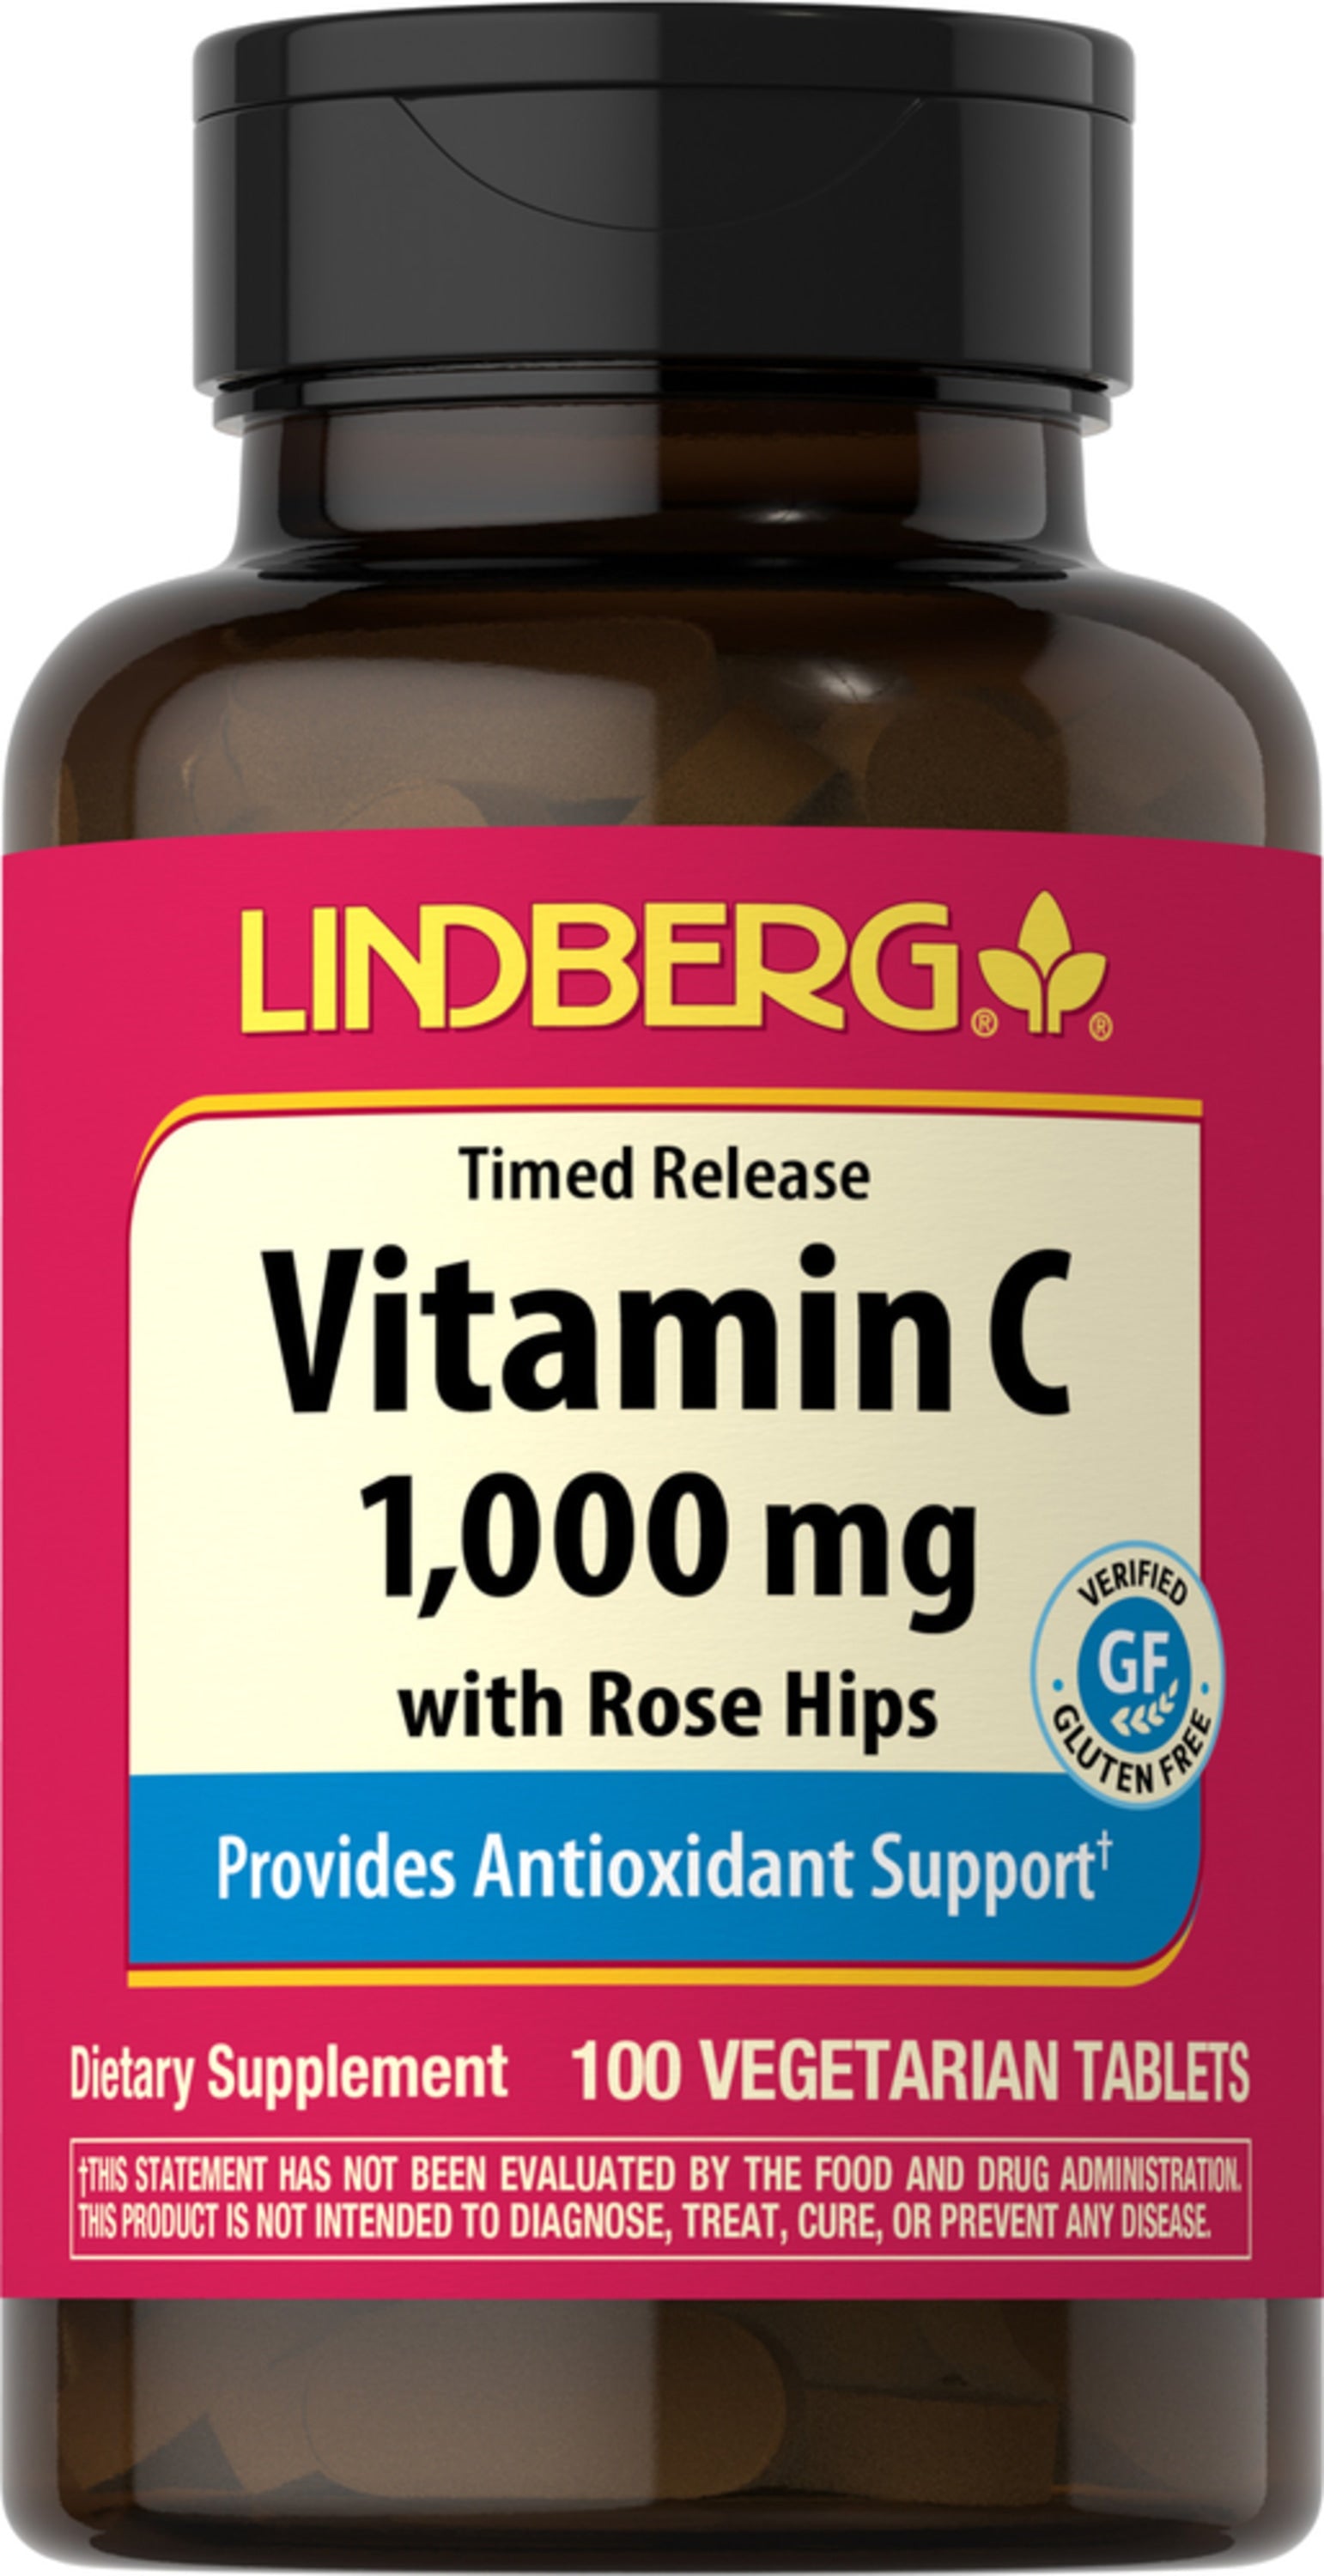 Vitamin C 1000 mg with Rose Hips (Timed Release), 100 Vegetarian Tablets